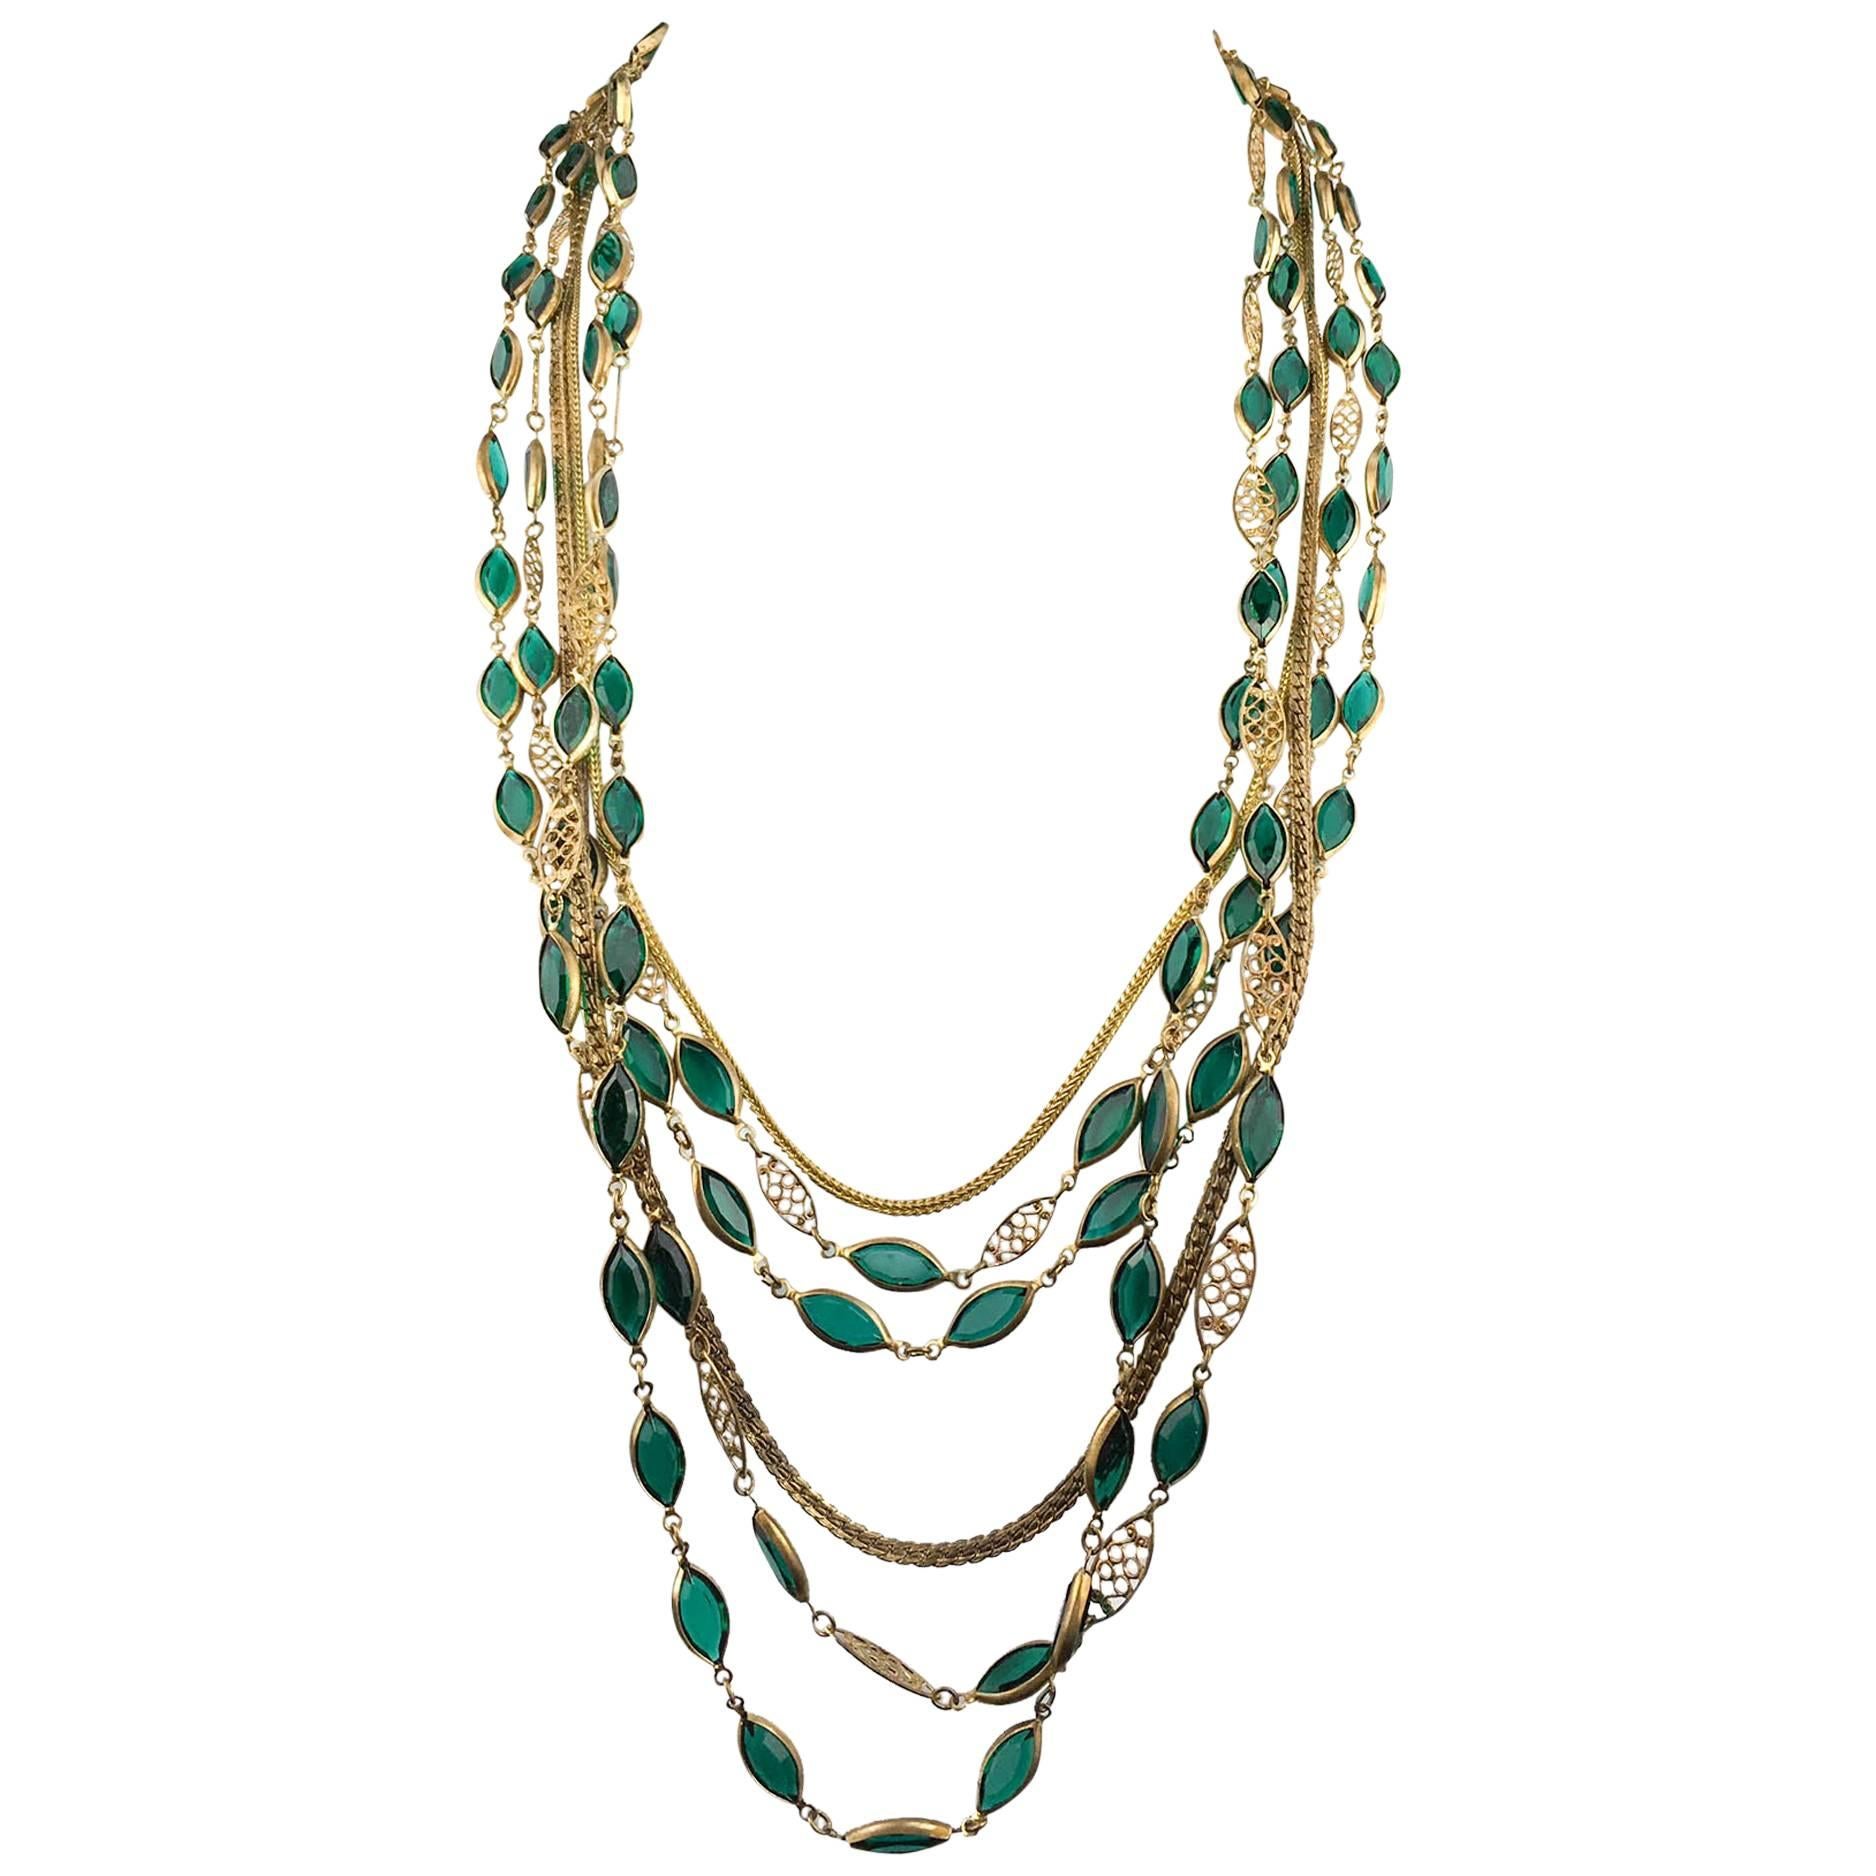 Multi-Strand Gold-Toned and Green Paste Necklace - 1940s/1950s For Sale